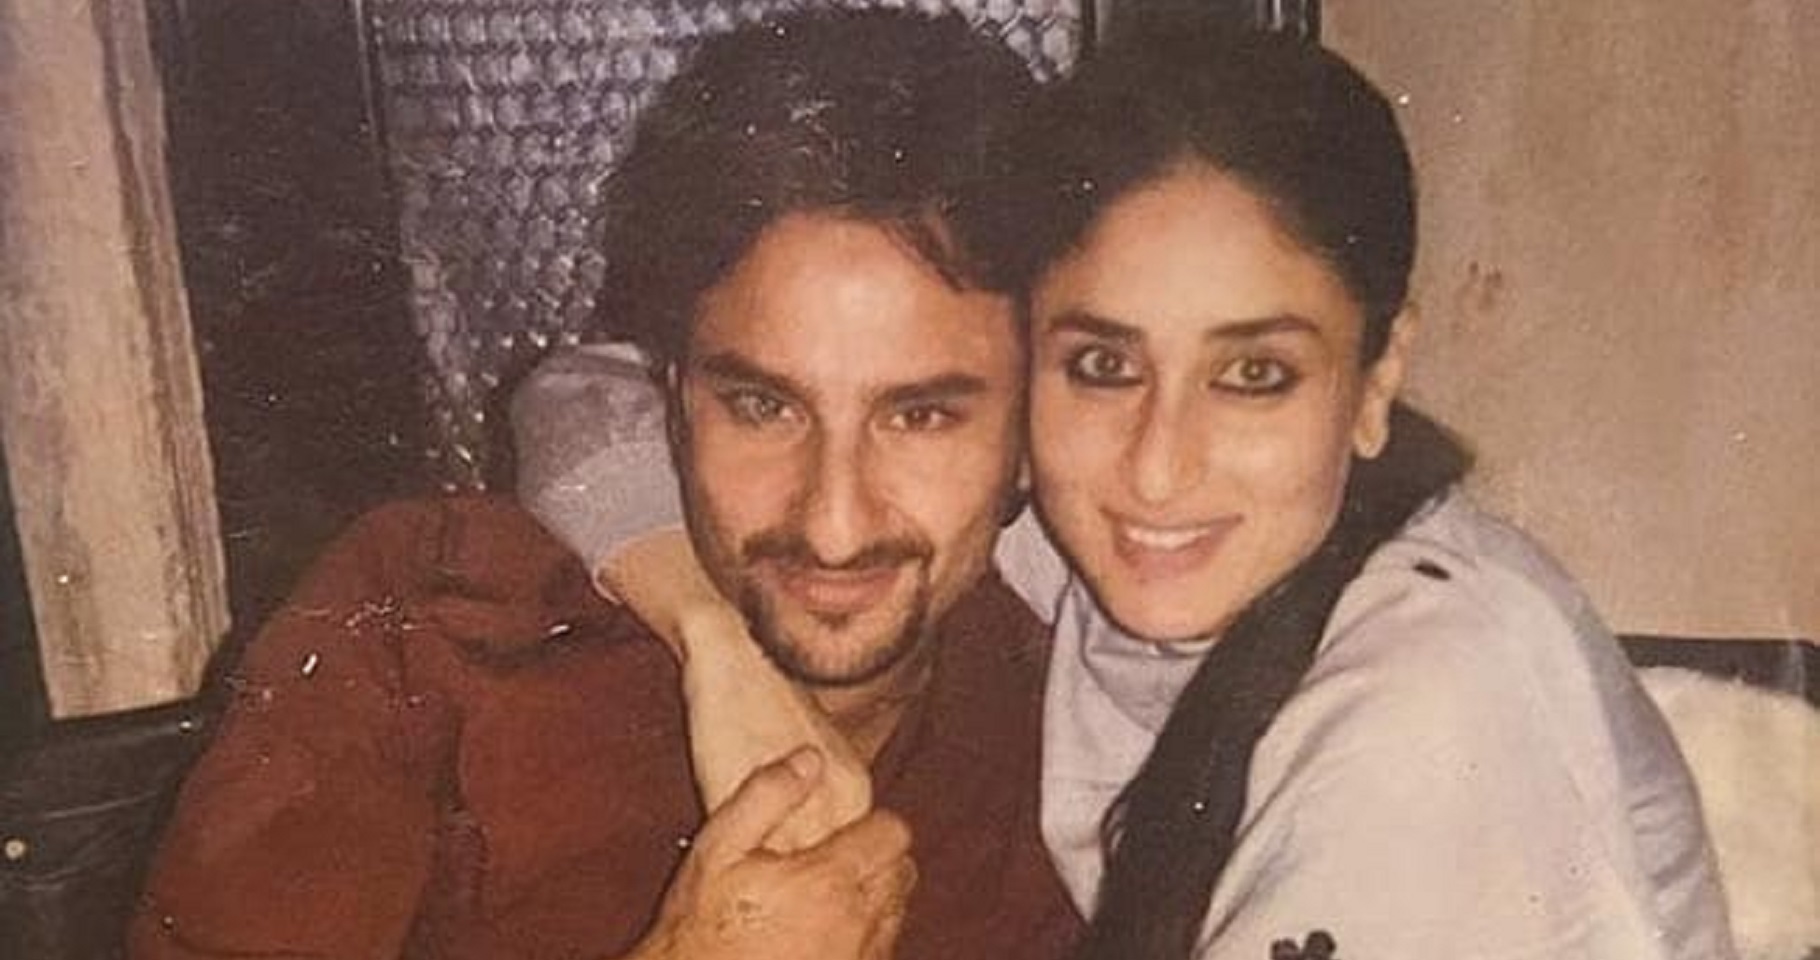 “To The Most Handsome Man In The World”: Kareena Kapoor Wishes Saif Ali Khan On Their Anniversary